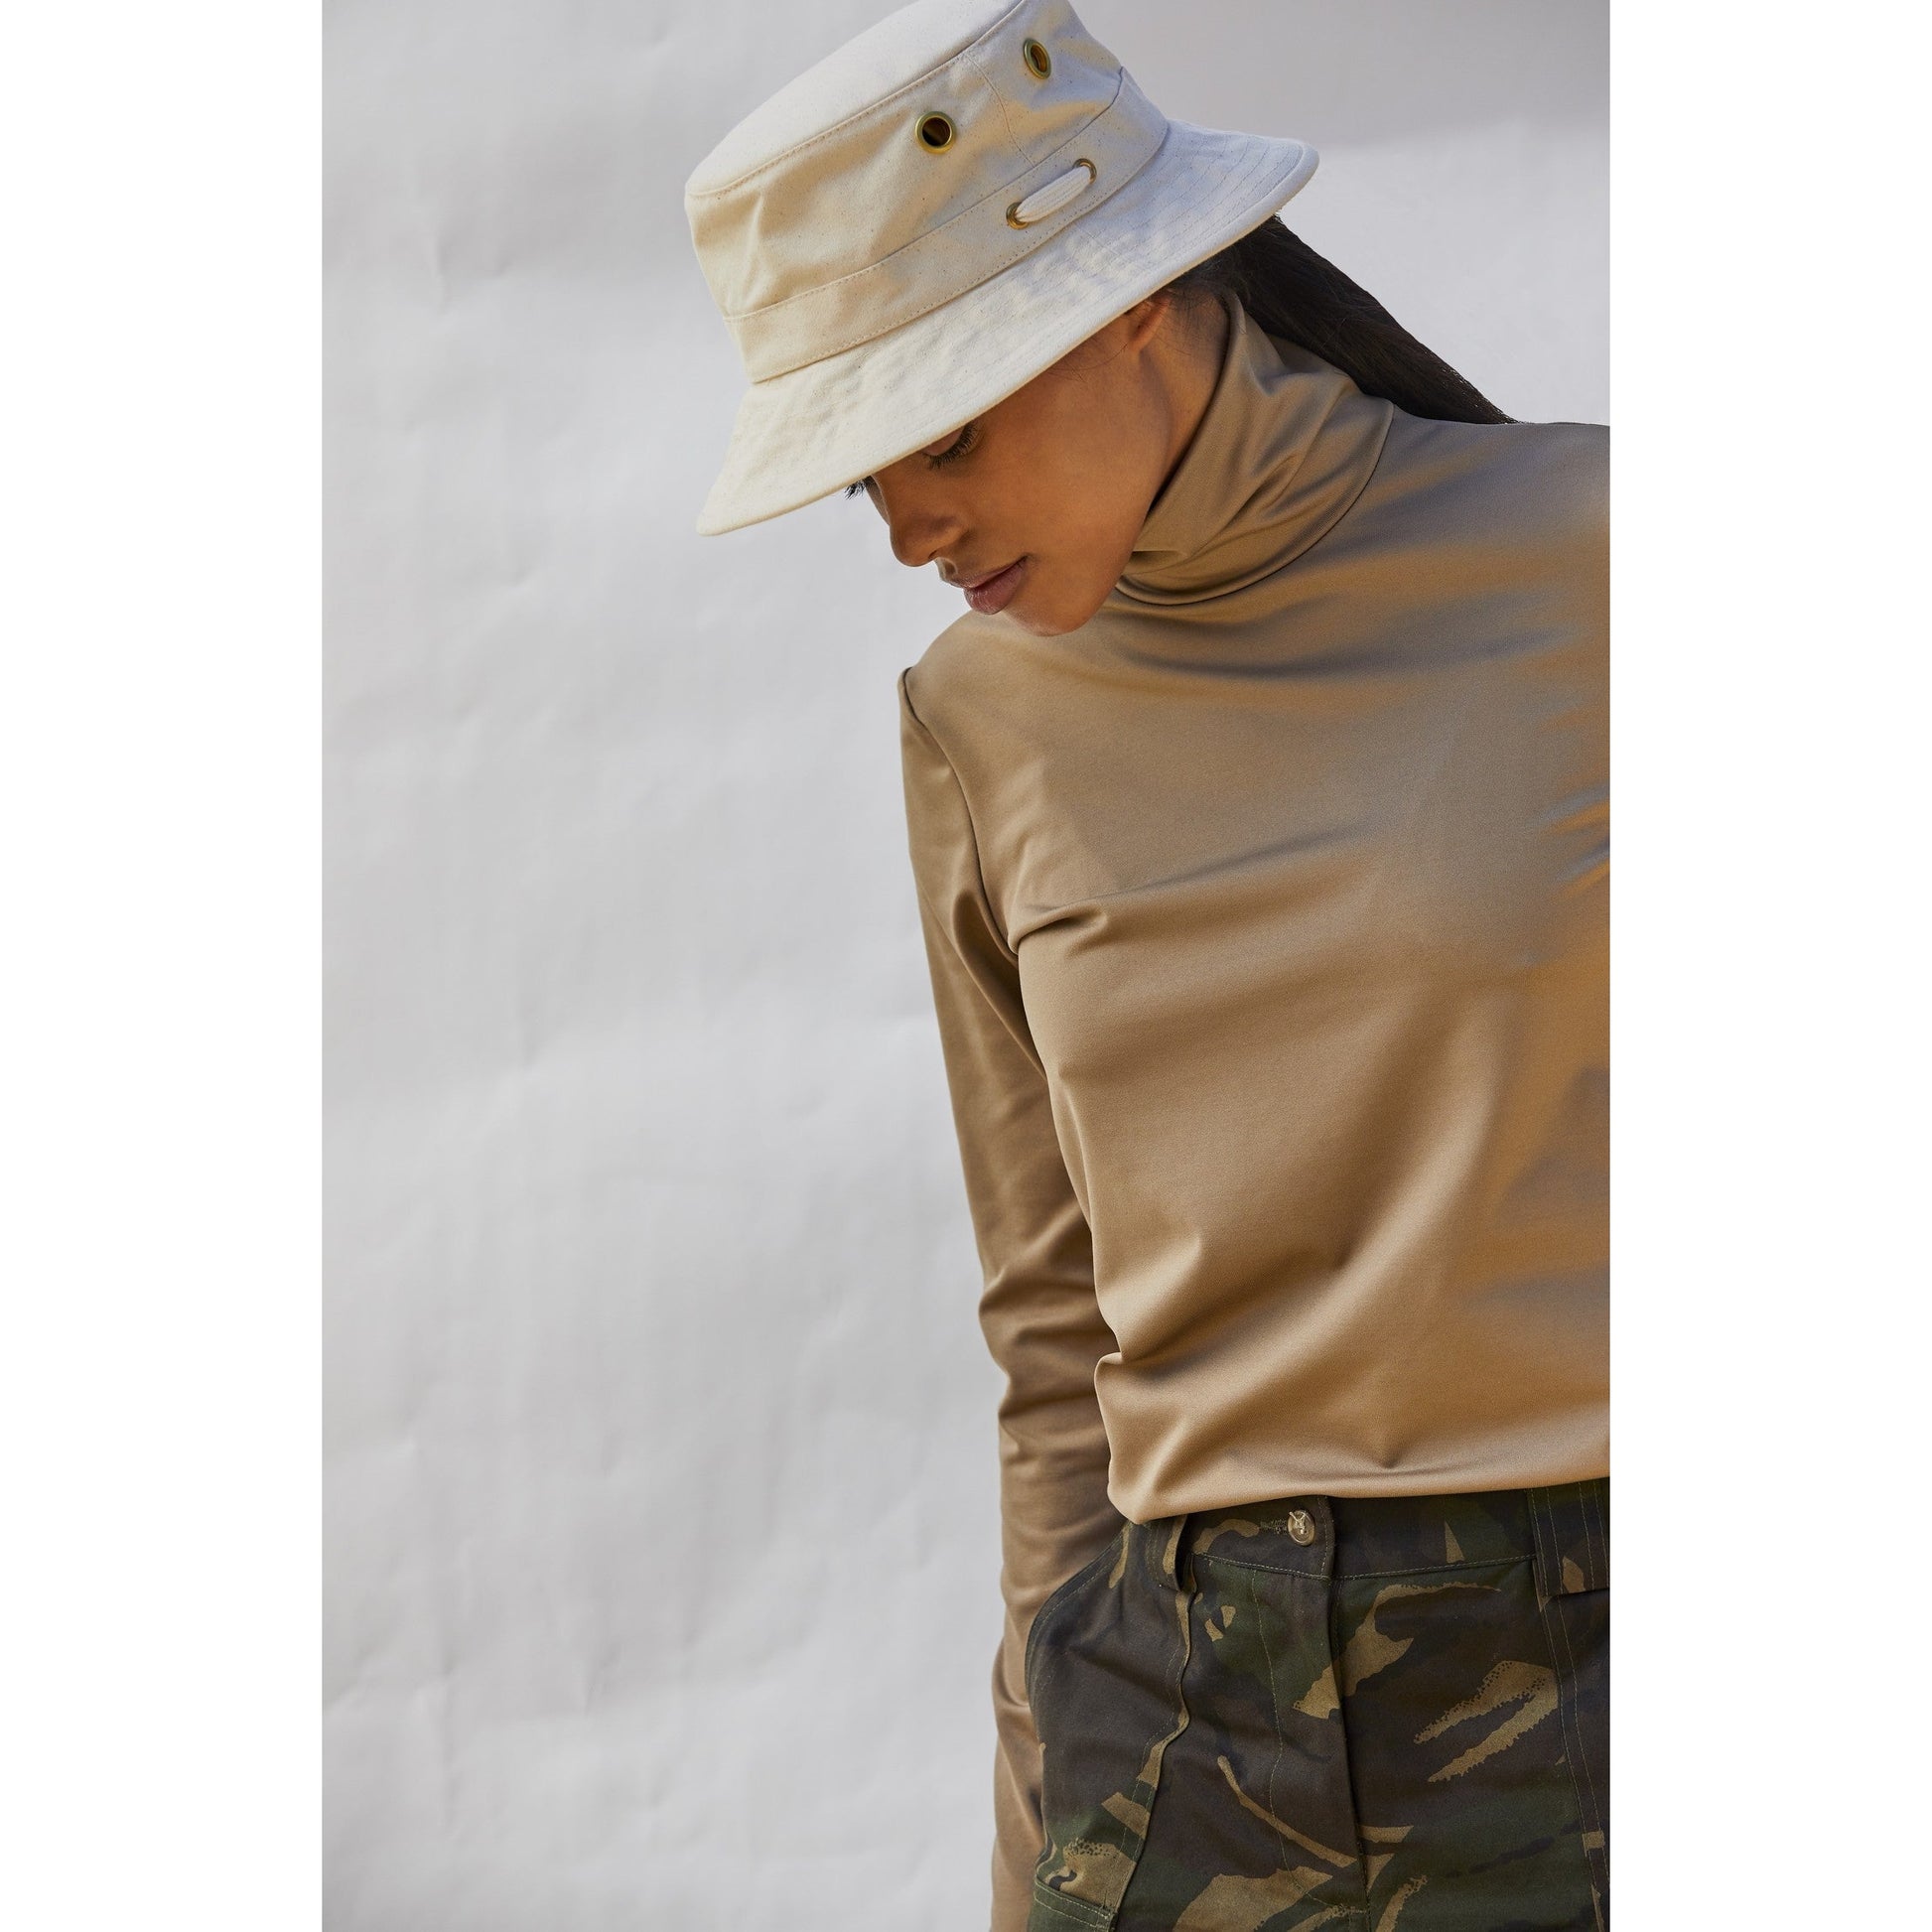 THE ICONIC T1 BUCKET HAT-HATS-TILLEY-JB Evans Fashions & Footwear